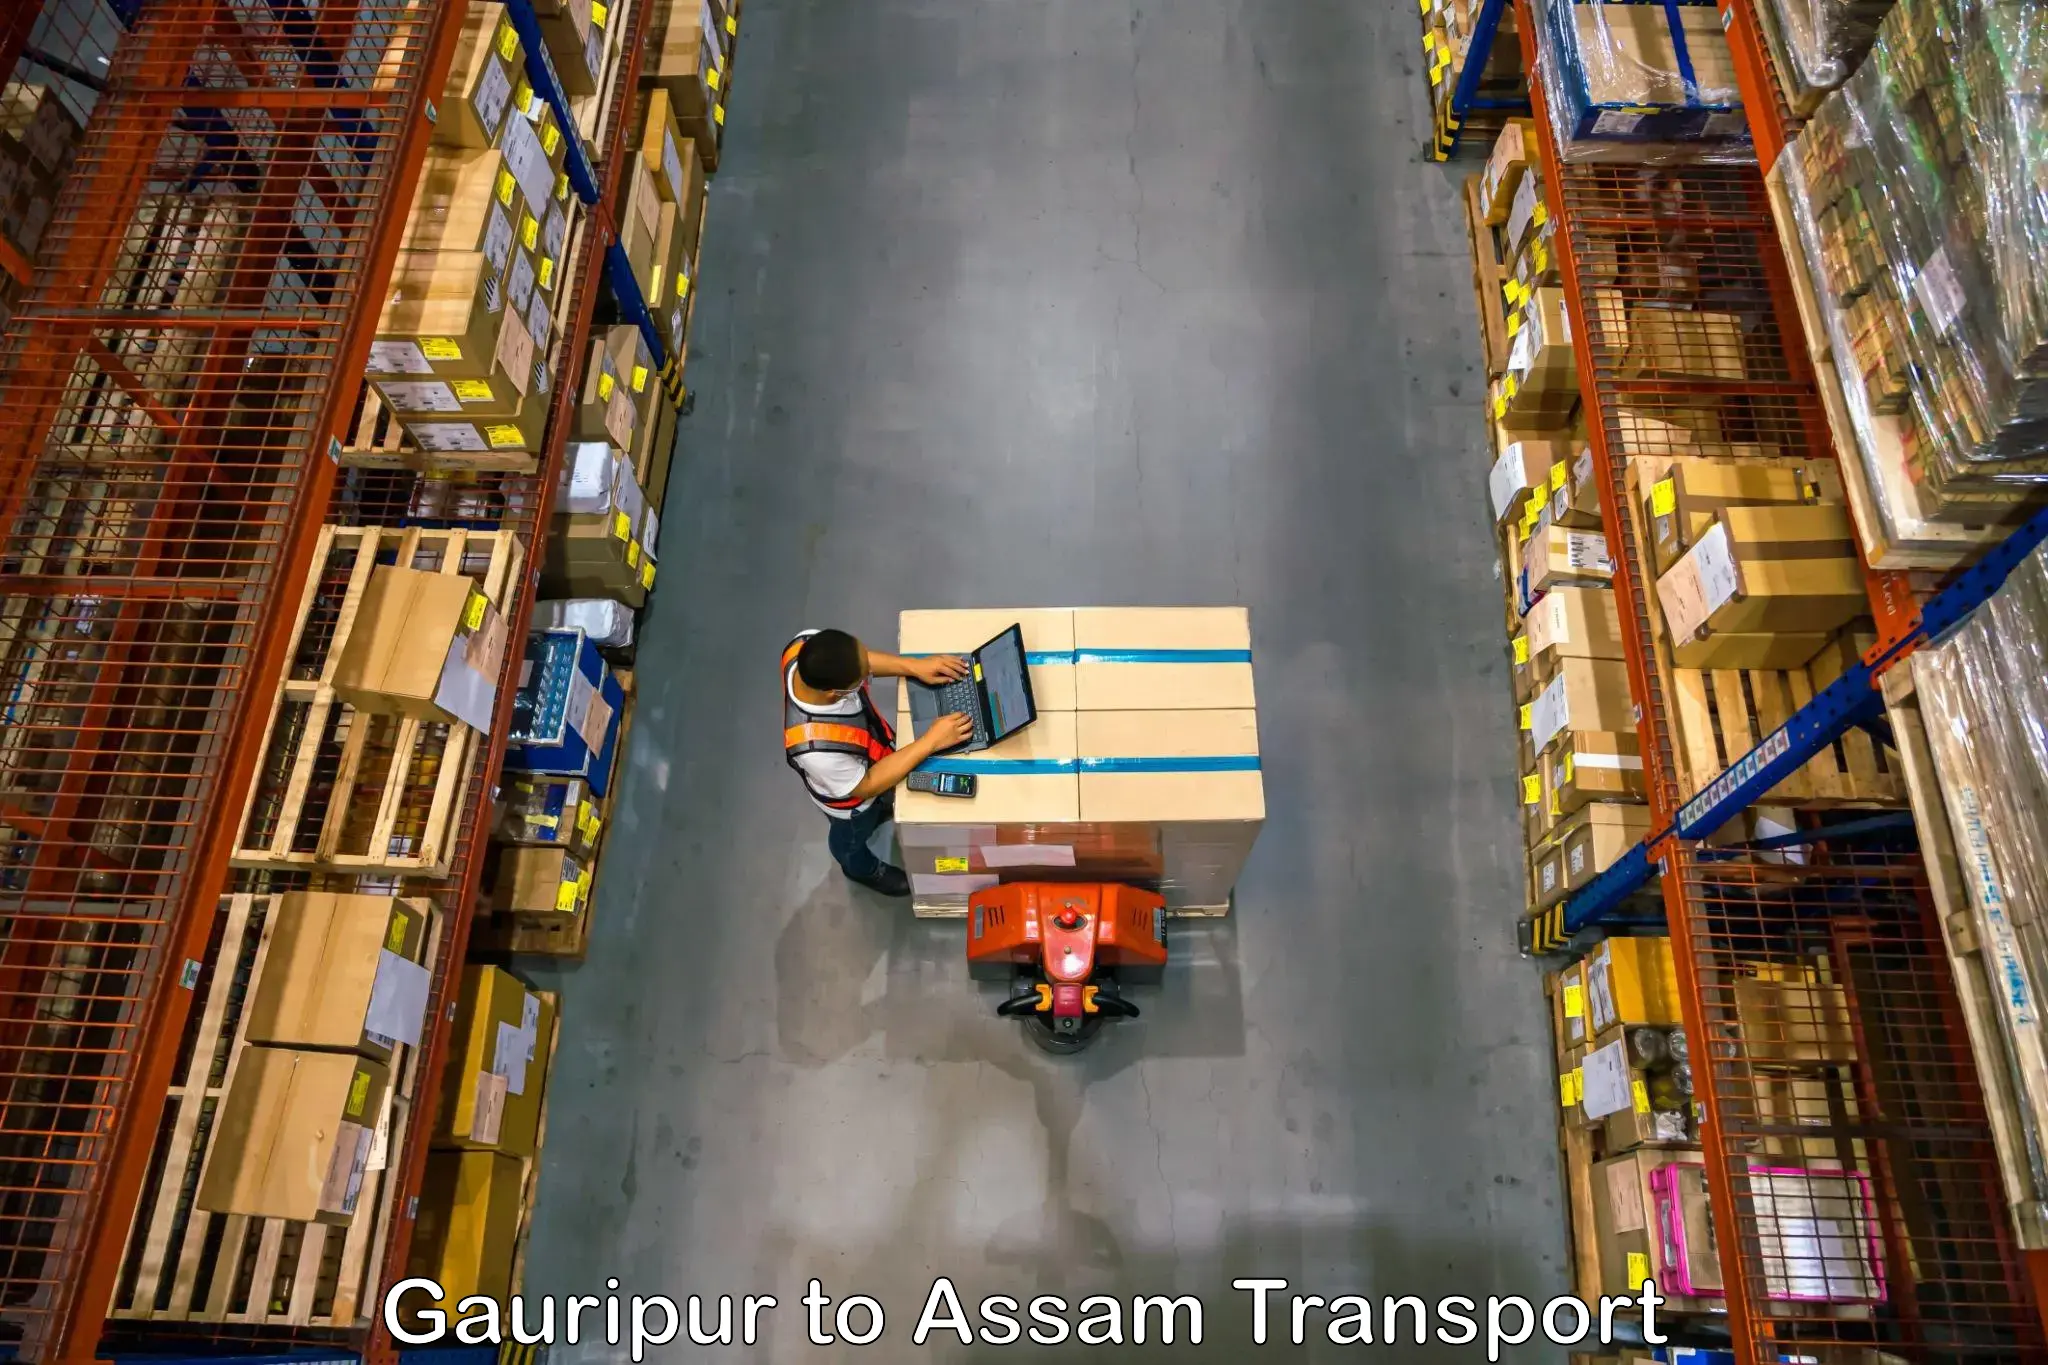 Two wheeler parcel service Gauripur to Lala Assam